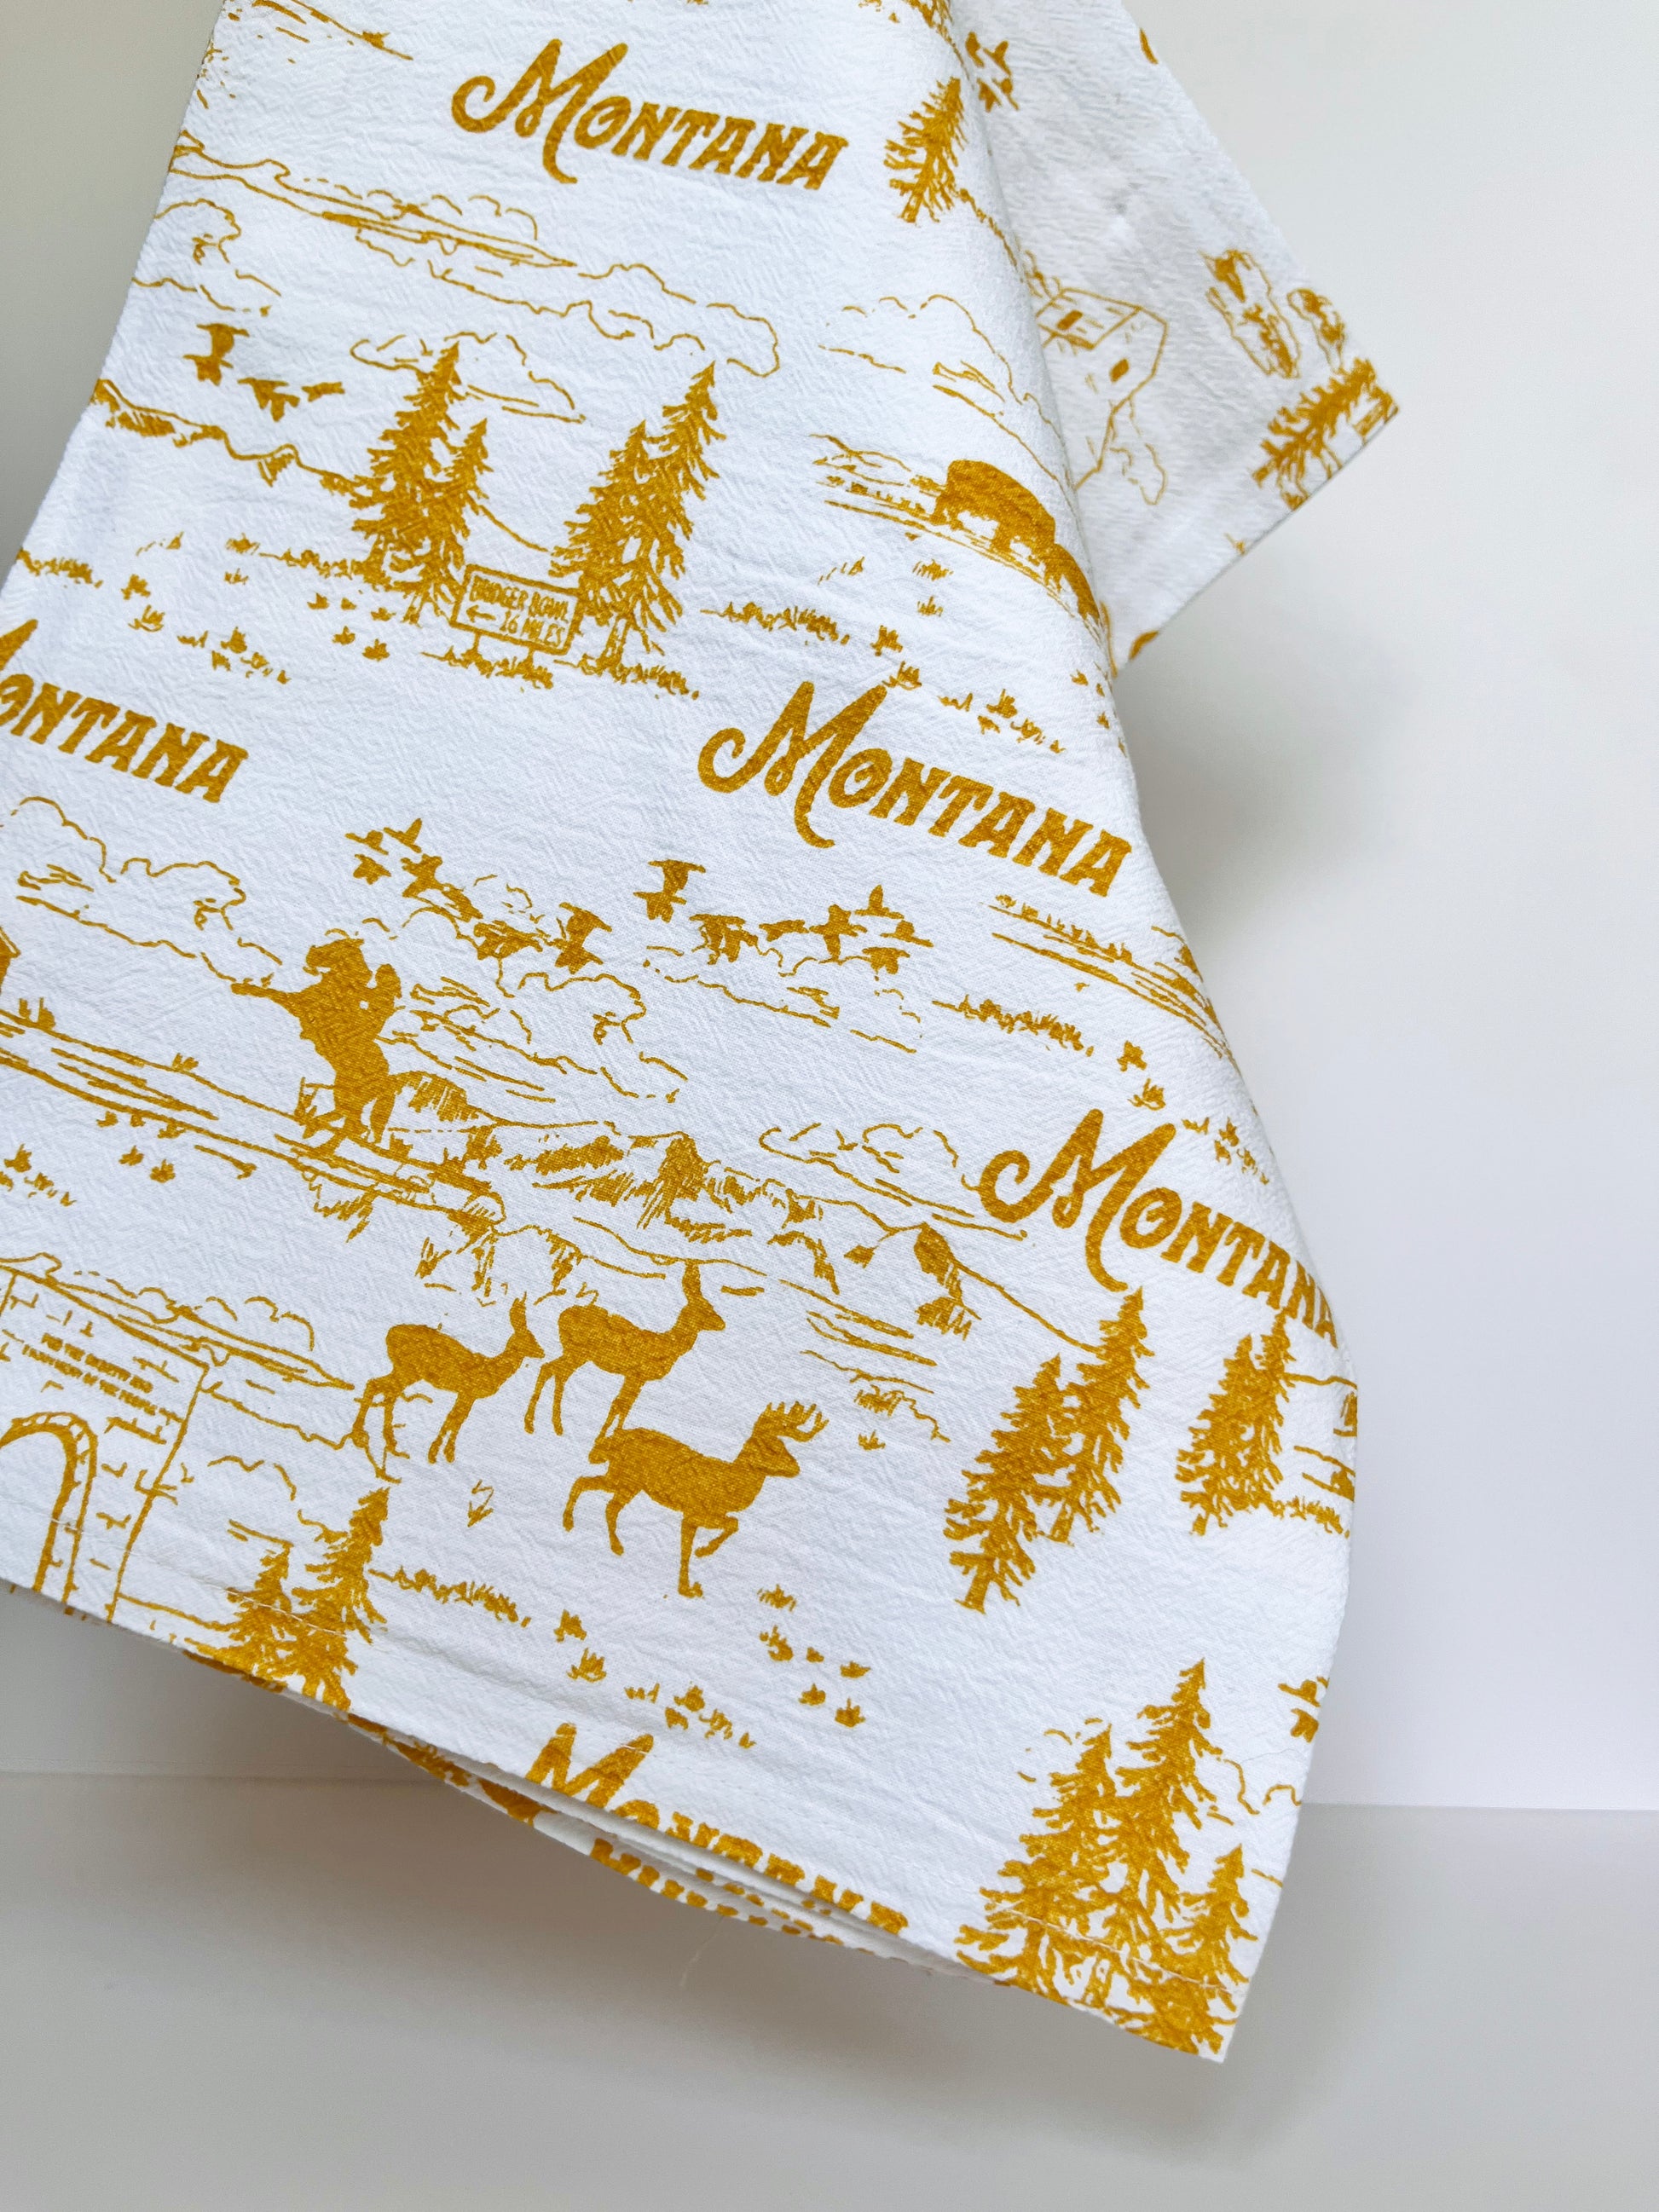 cute montana kitchen towel various scenes cowgirl cowboy elk deer pine trees bison mountains big sky birds yellowstone grain elevator ranch souvenir from montana coin laundry pretty cotton dish towels  